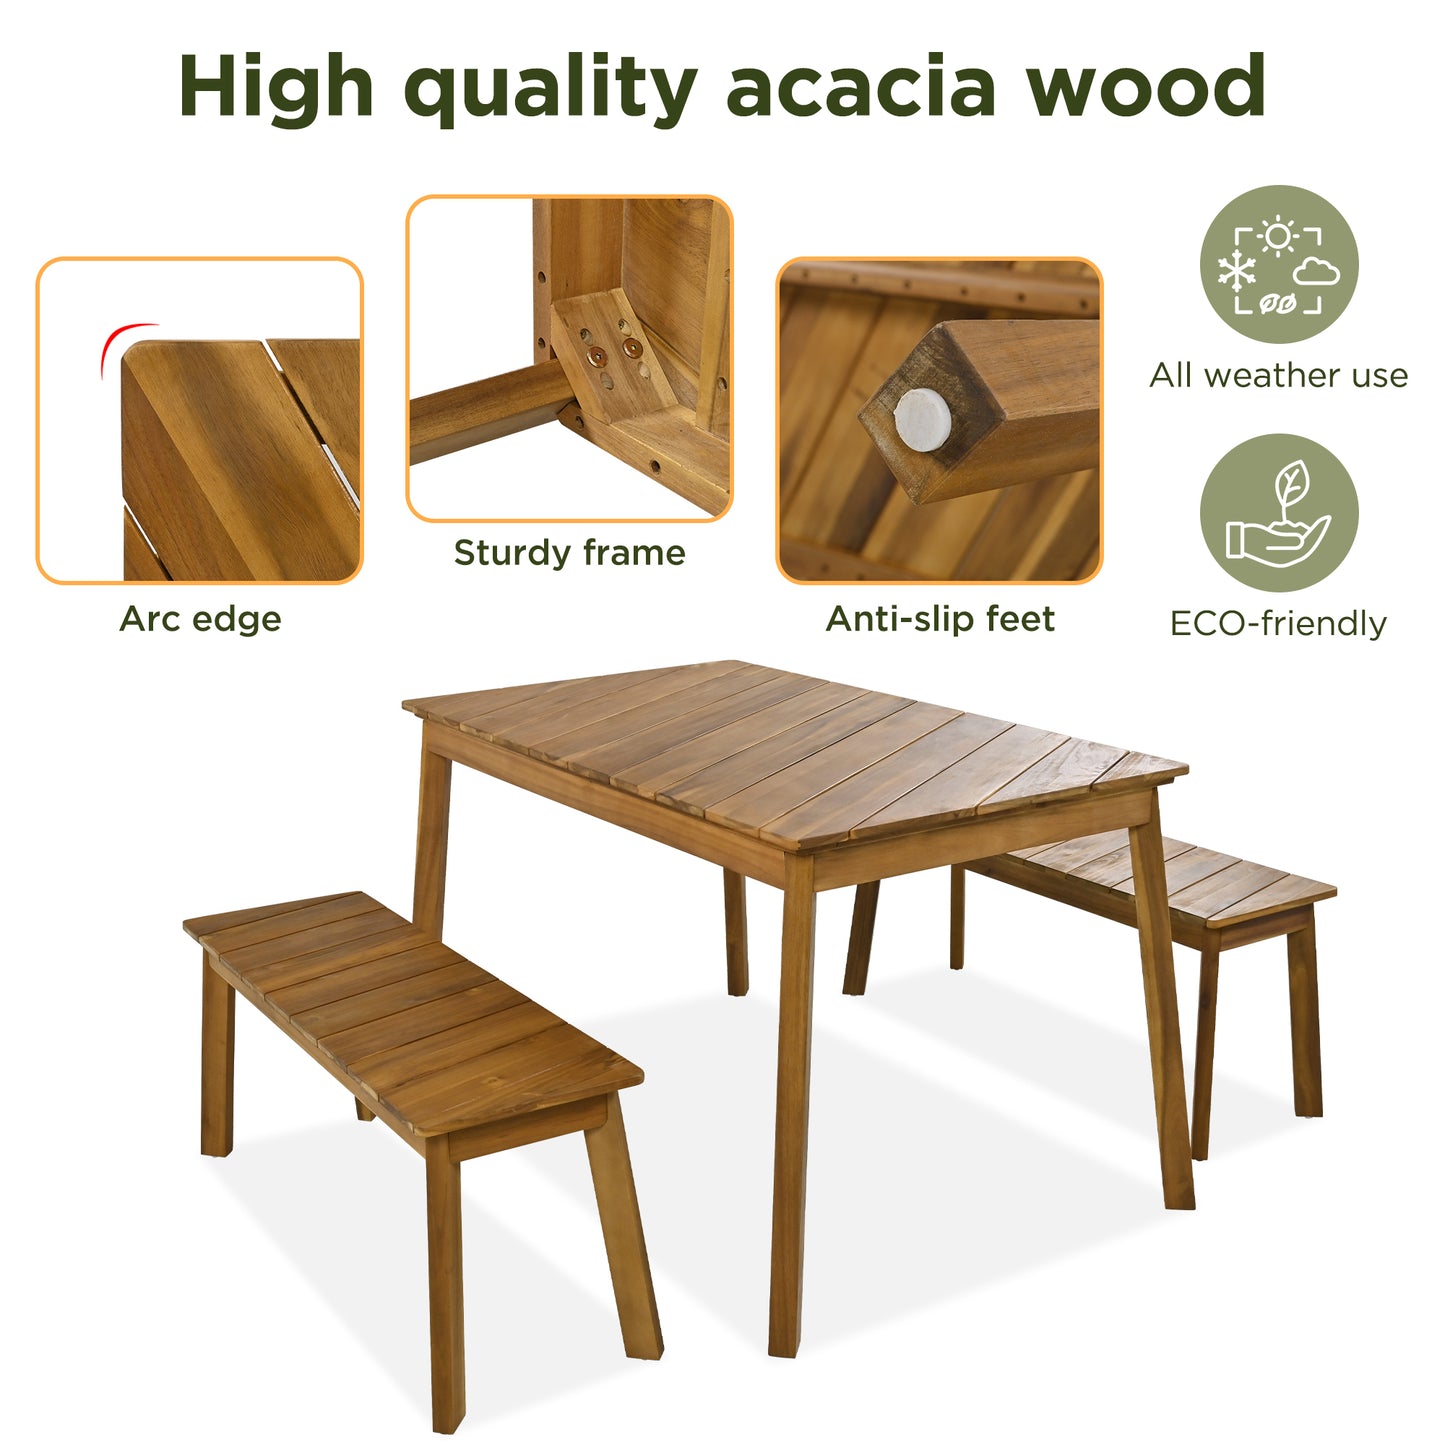 3 Pieces Acacia Wood Table Bench Dining Set - Ukerr Home